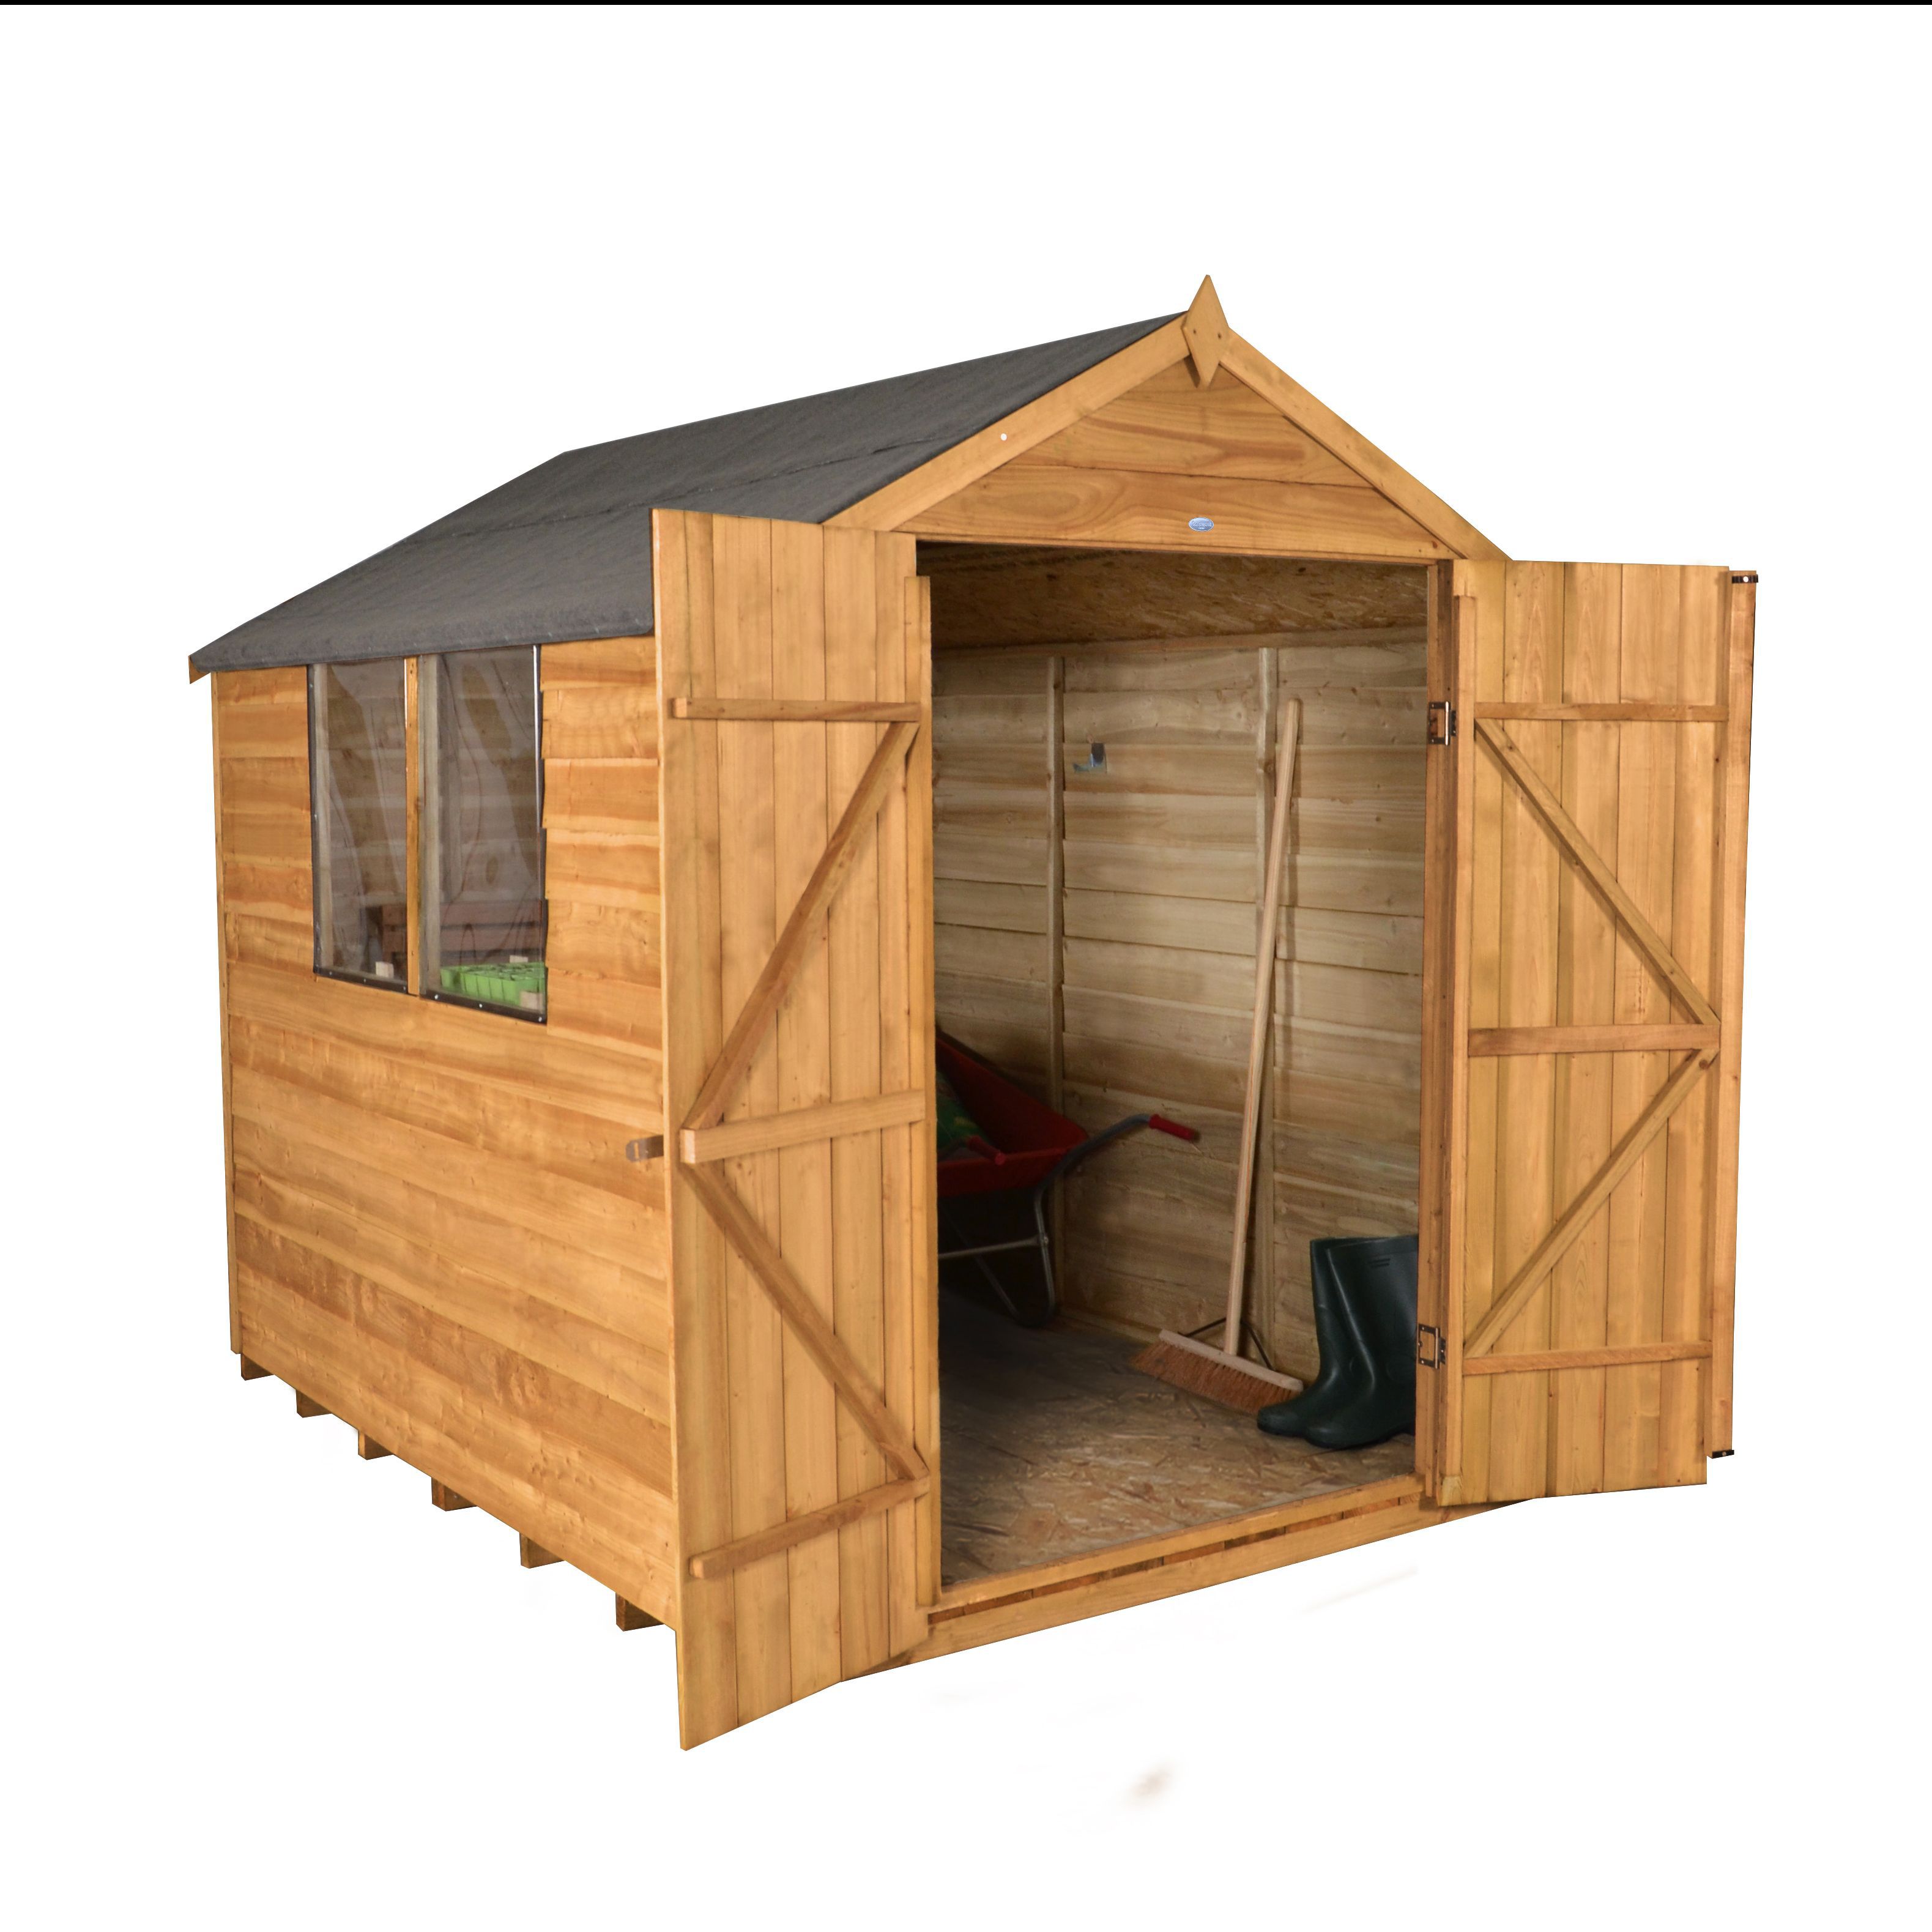 Forest Garden 8x6 Apex Overlap Wooden Shed